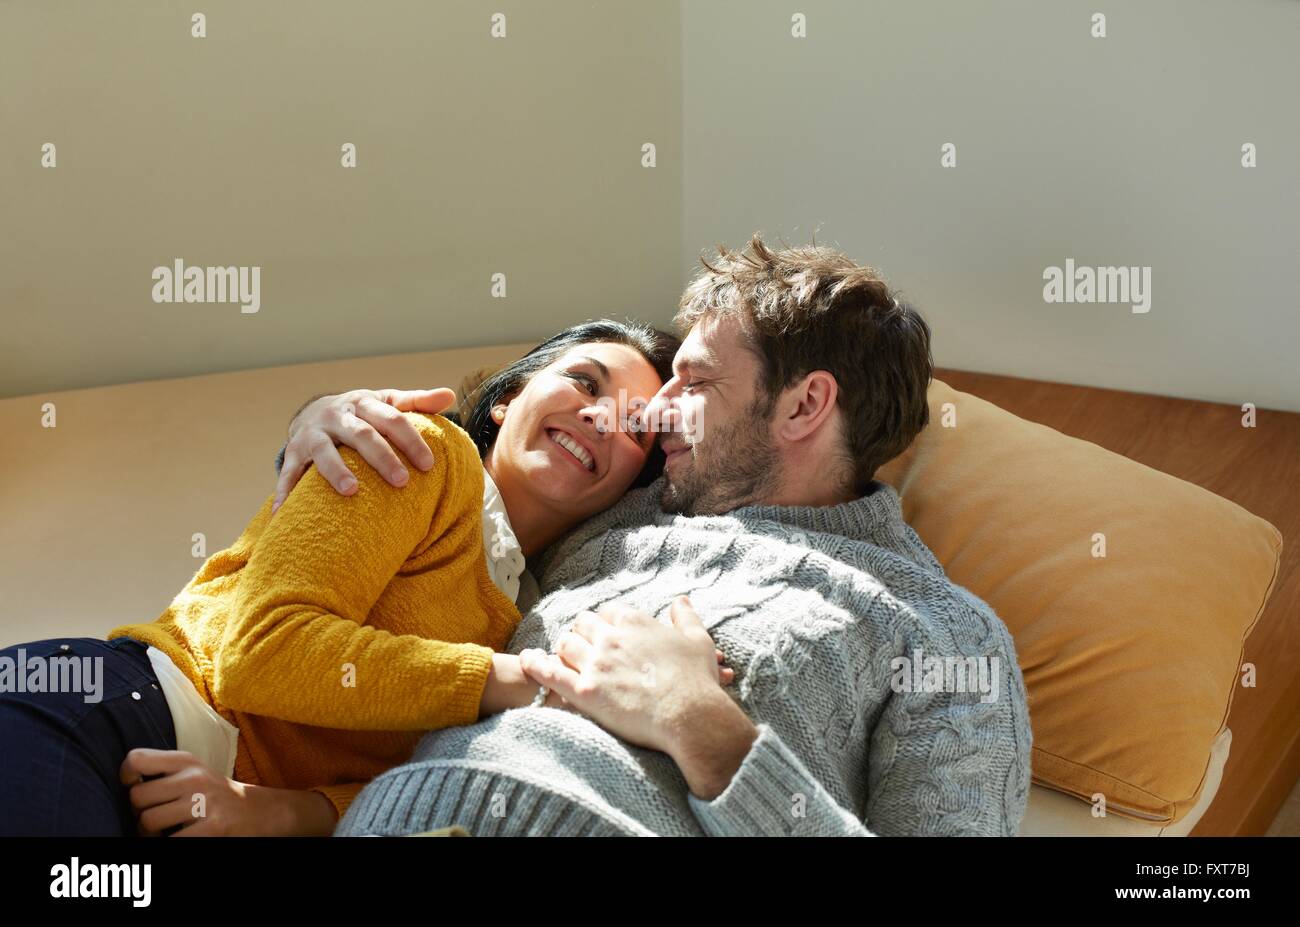 Mid adult couple on window seat face to face laughing Stock Photo